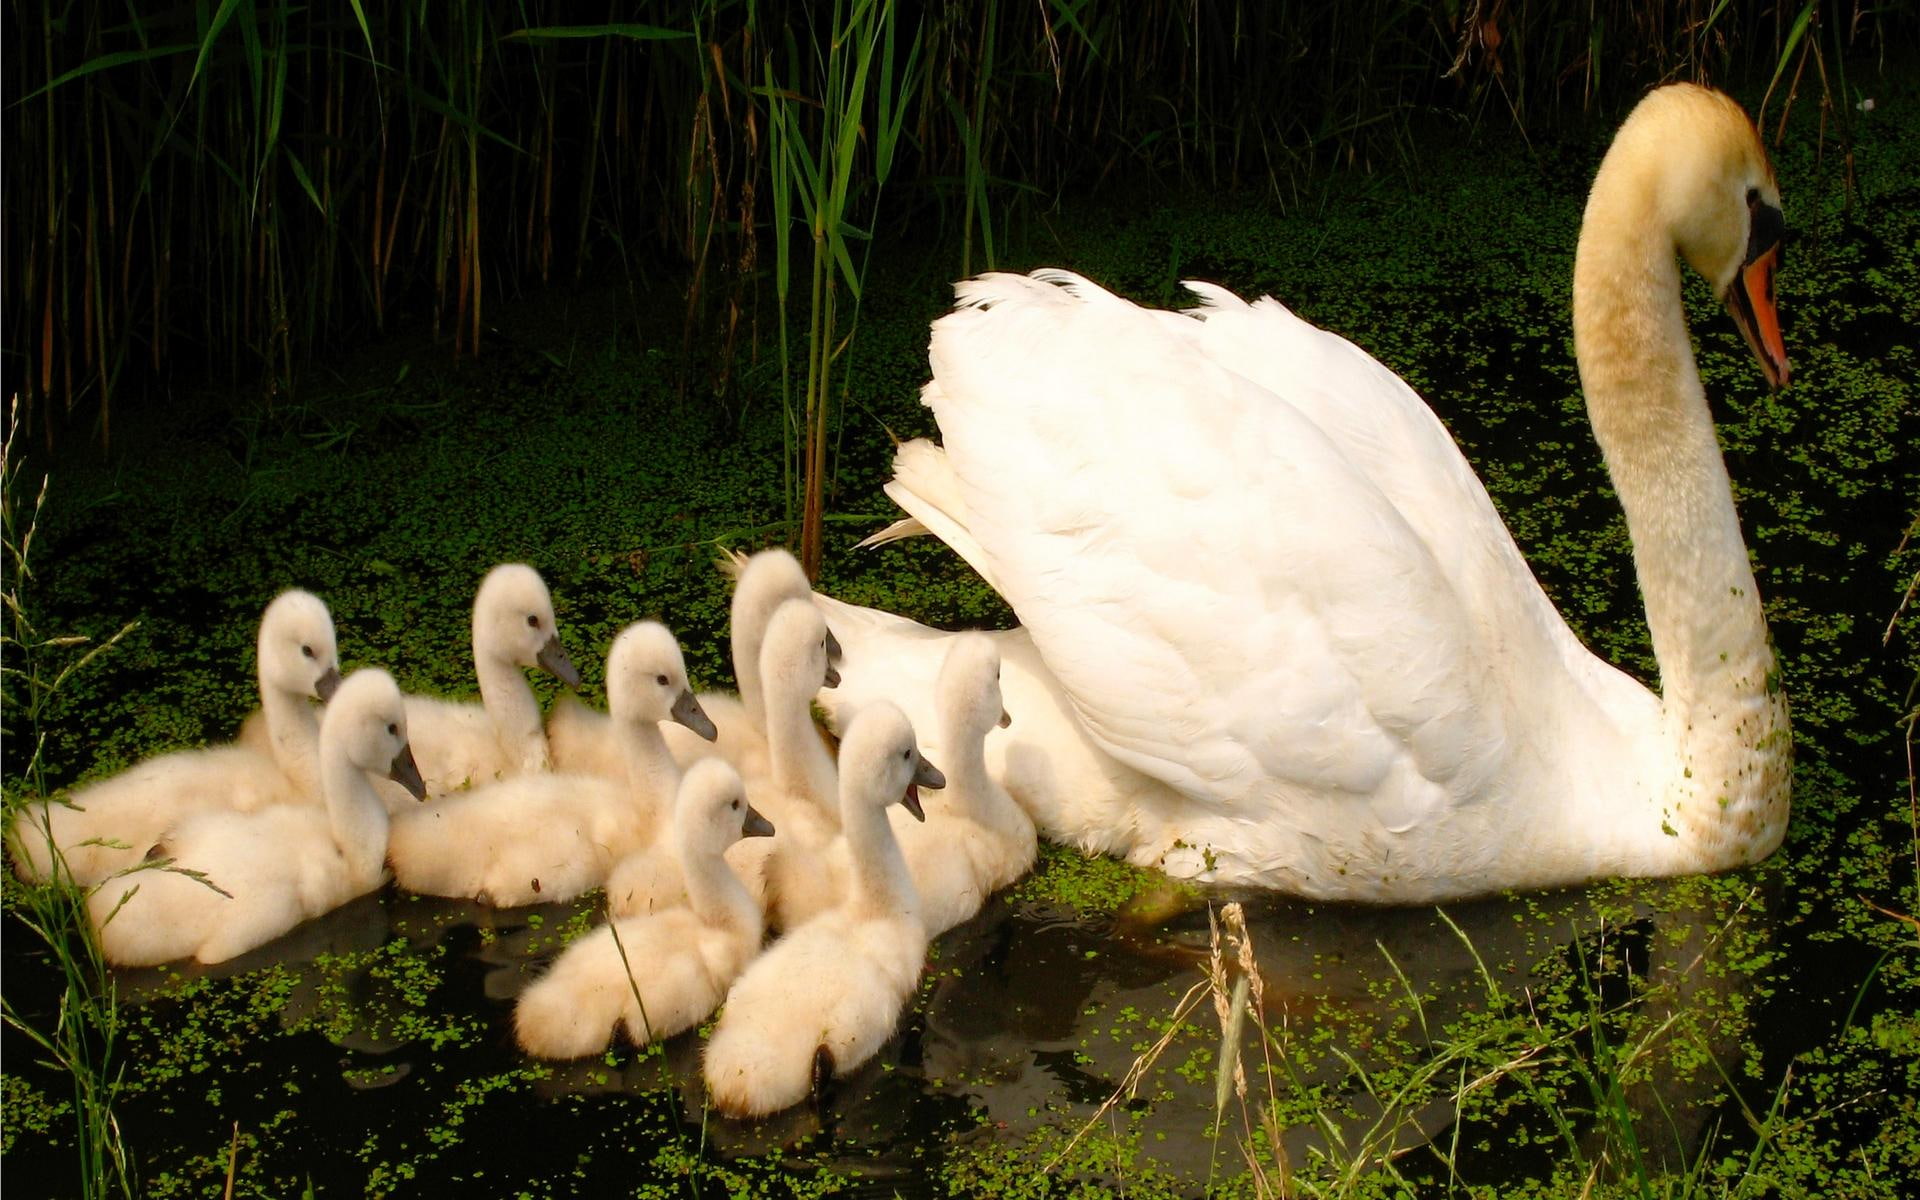 Follow Mama, cygnets, photography, mother, swan, pond, green